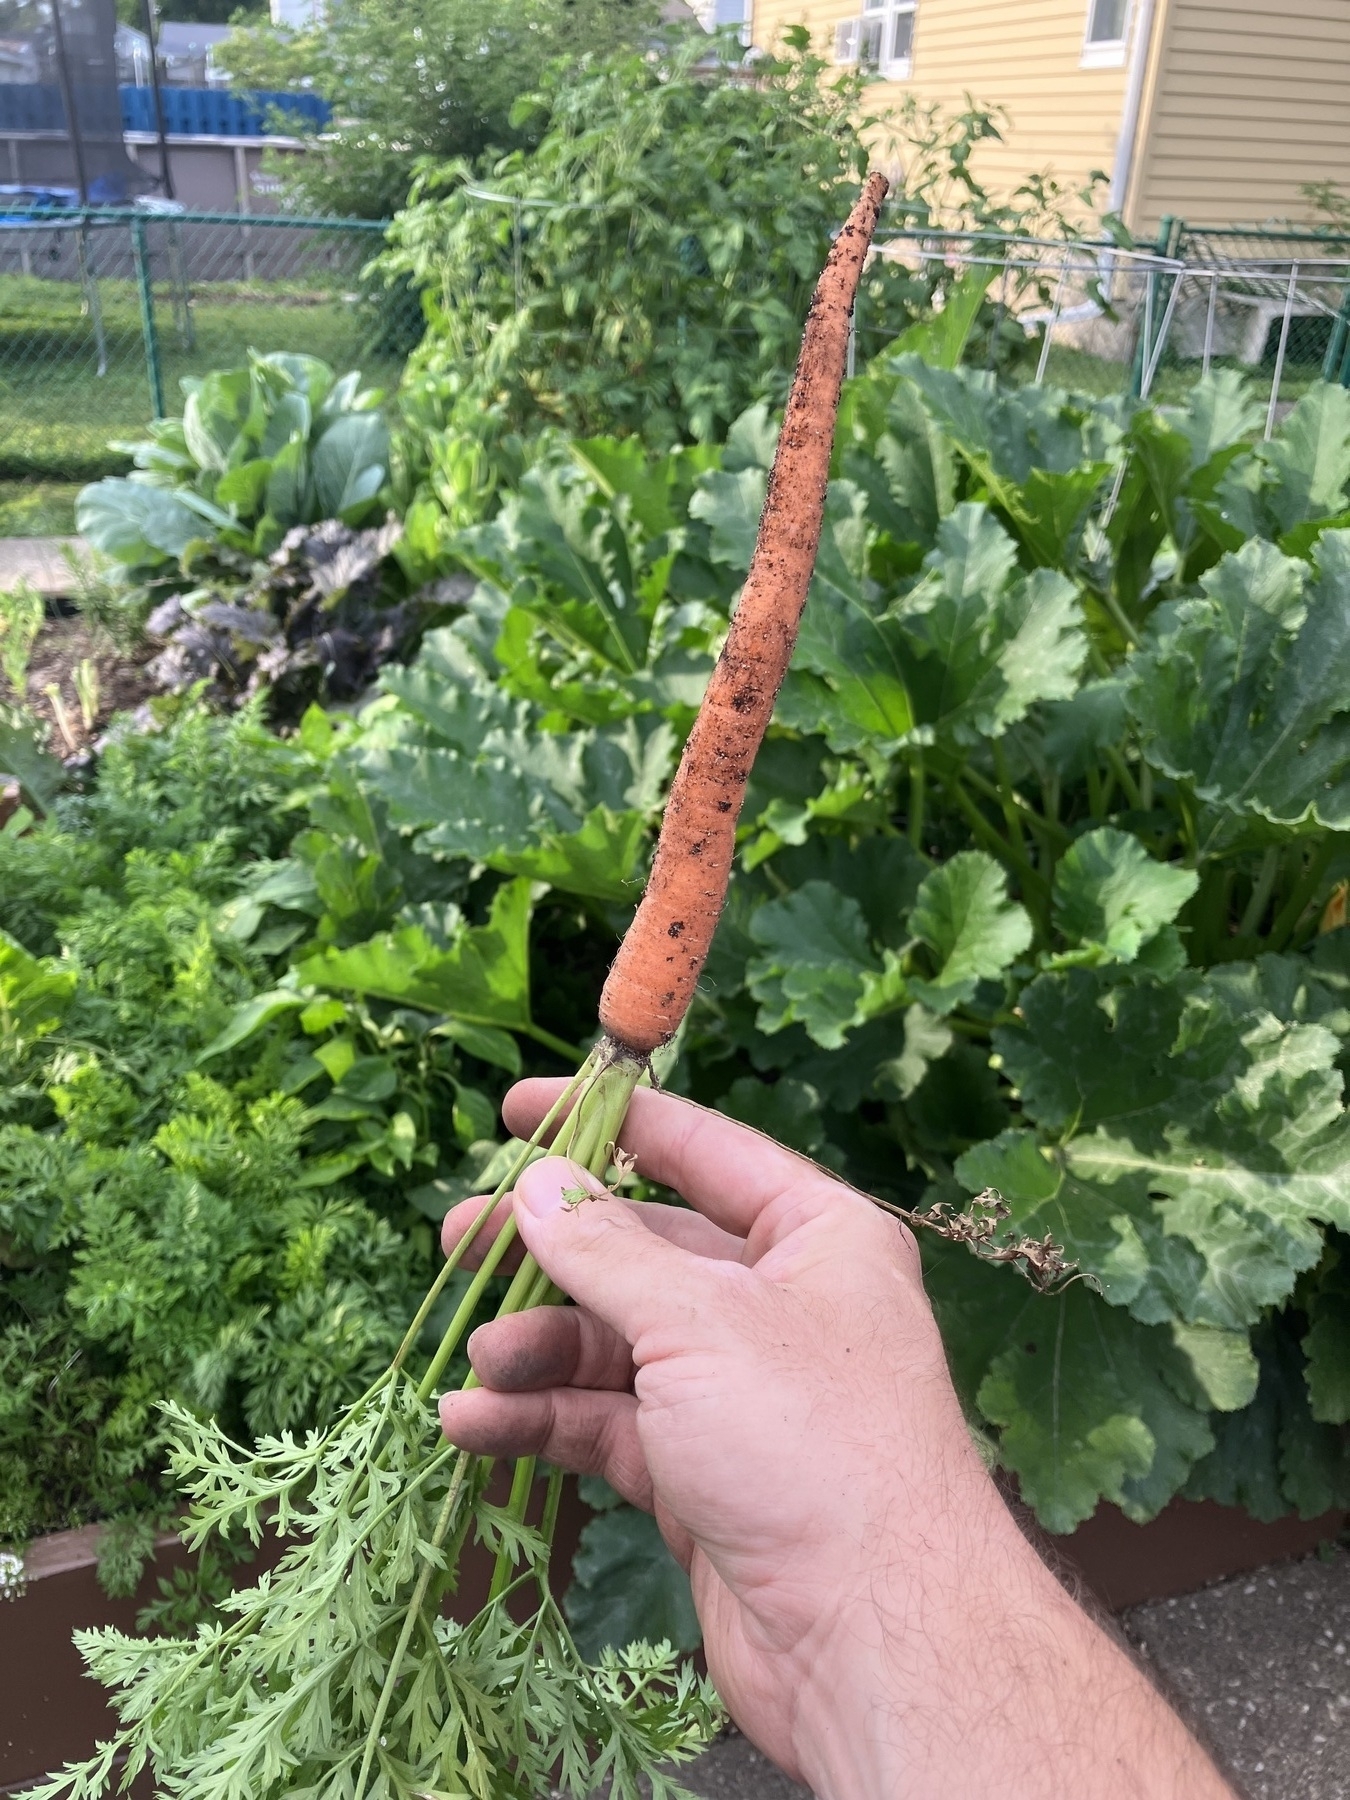 Carrot against a background of lord garden plants